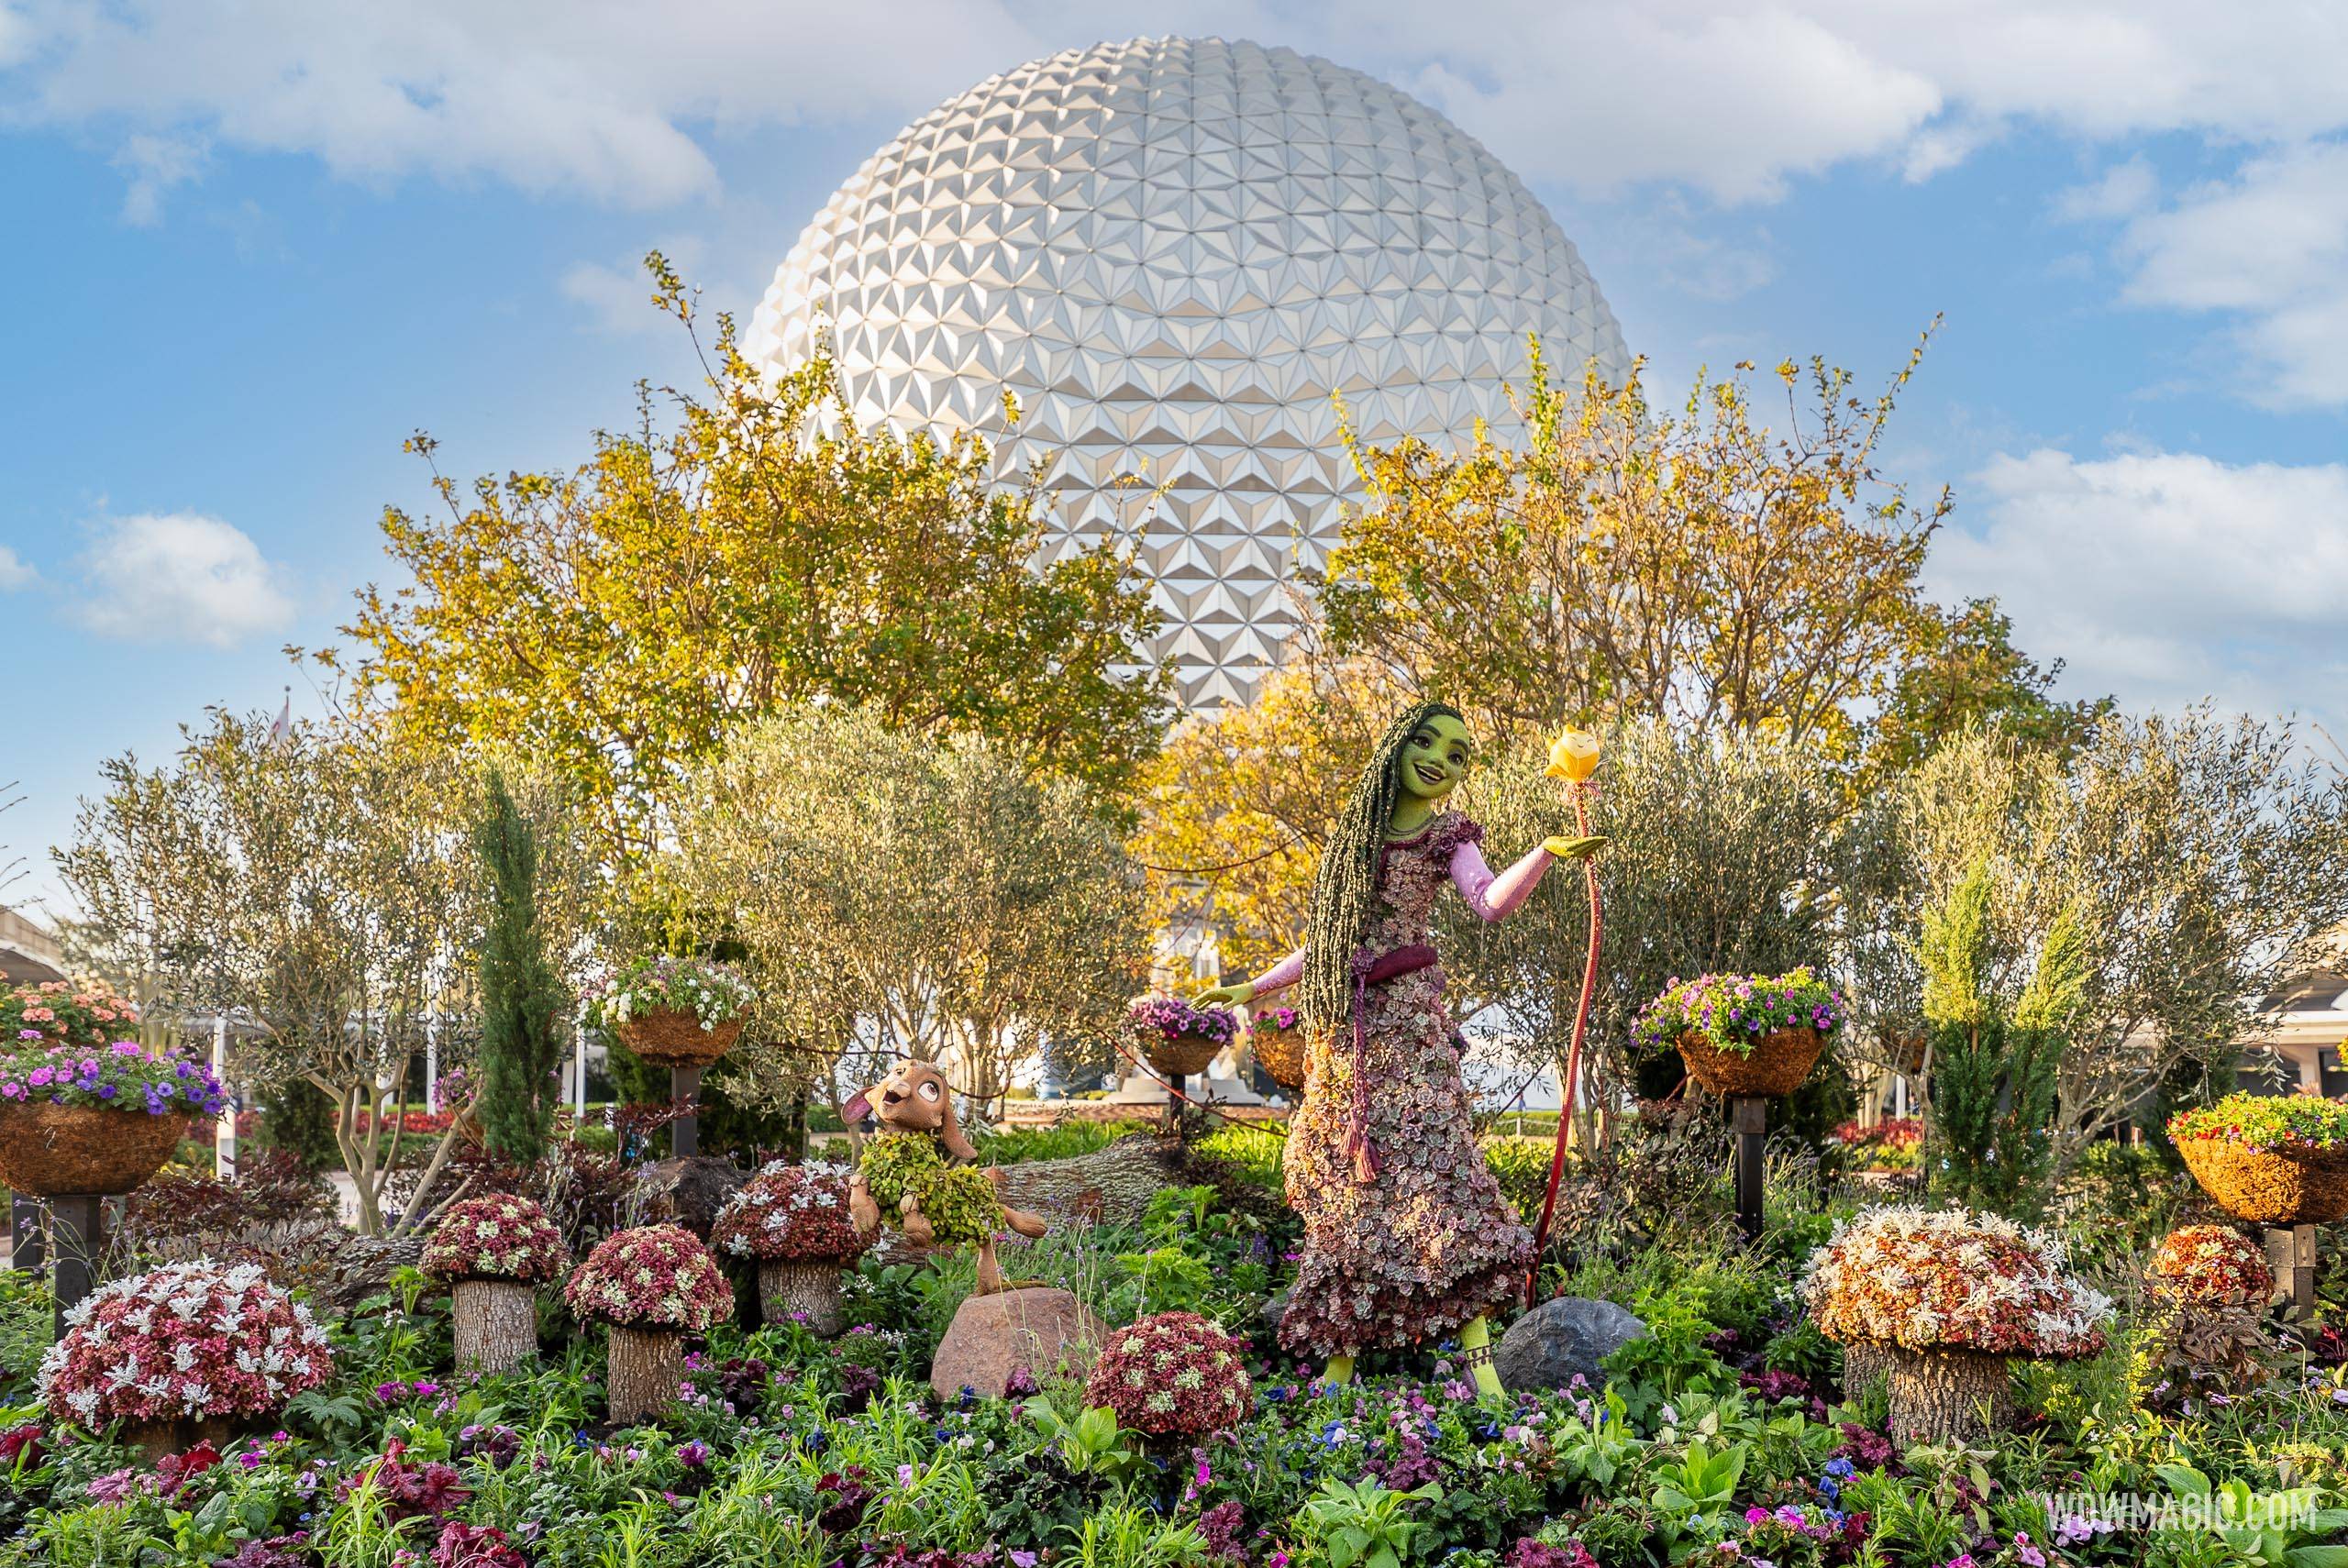 New Outdoor Kitchens and topiaries to join the 2017 Epcot International Flower and Garden Festival